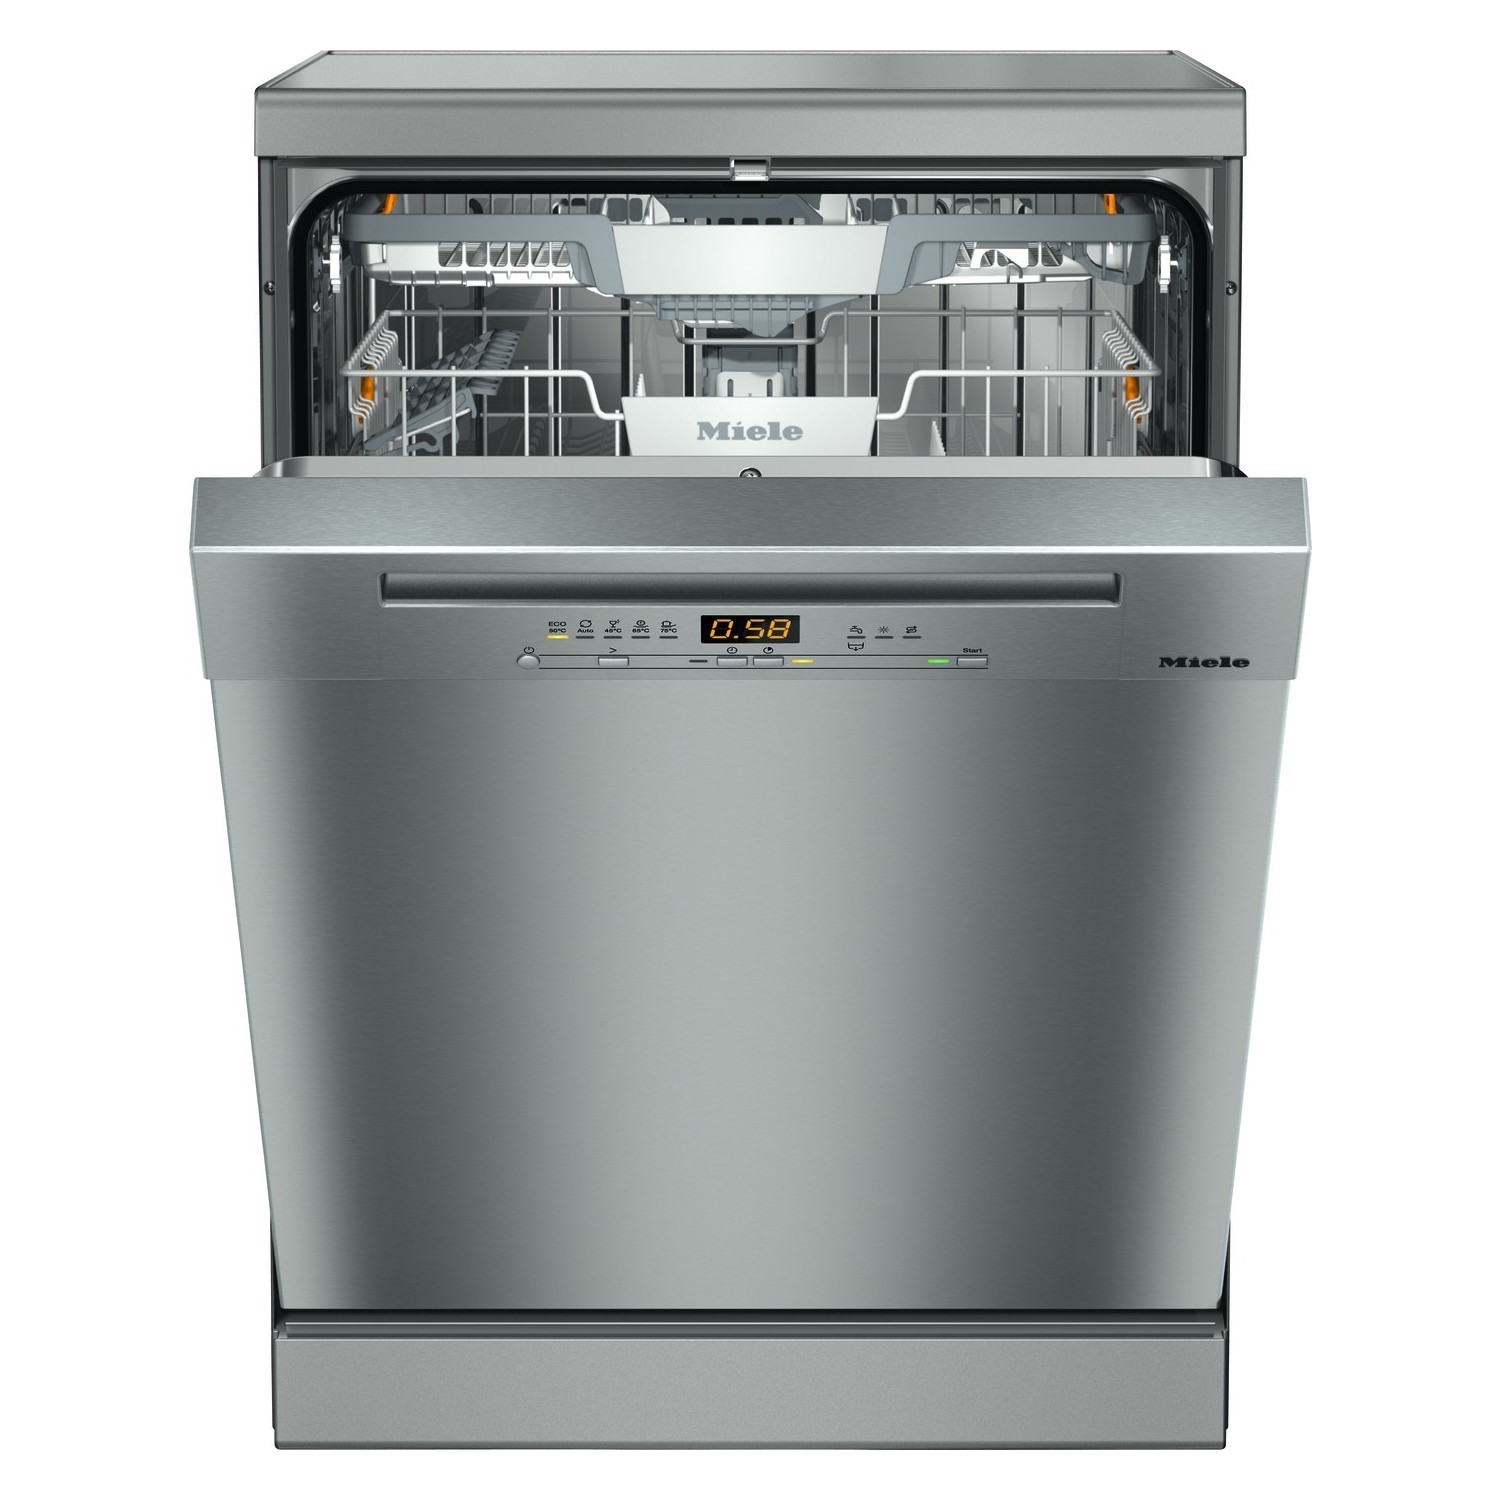 Miele G5200-Series Freestanding Dishwasher - Stainless Steel